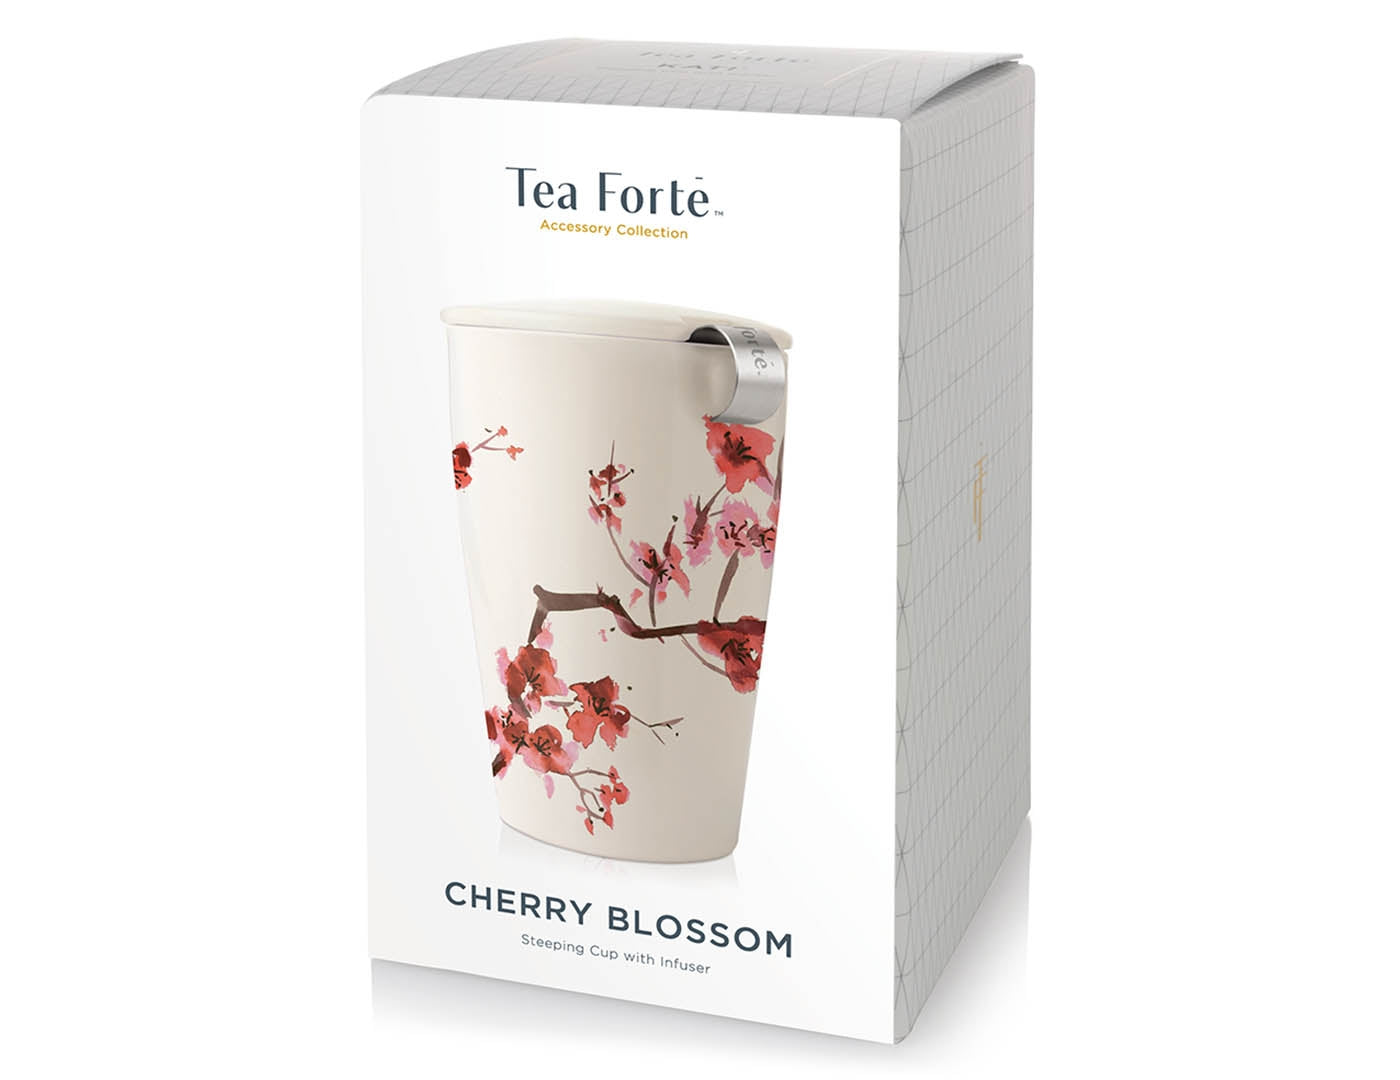 Cherry Blossom design KATI® Steeping cup with infuser showing packaging